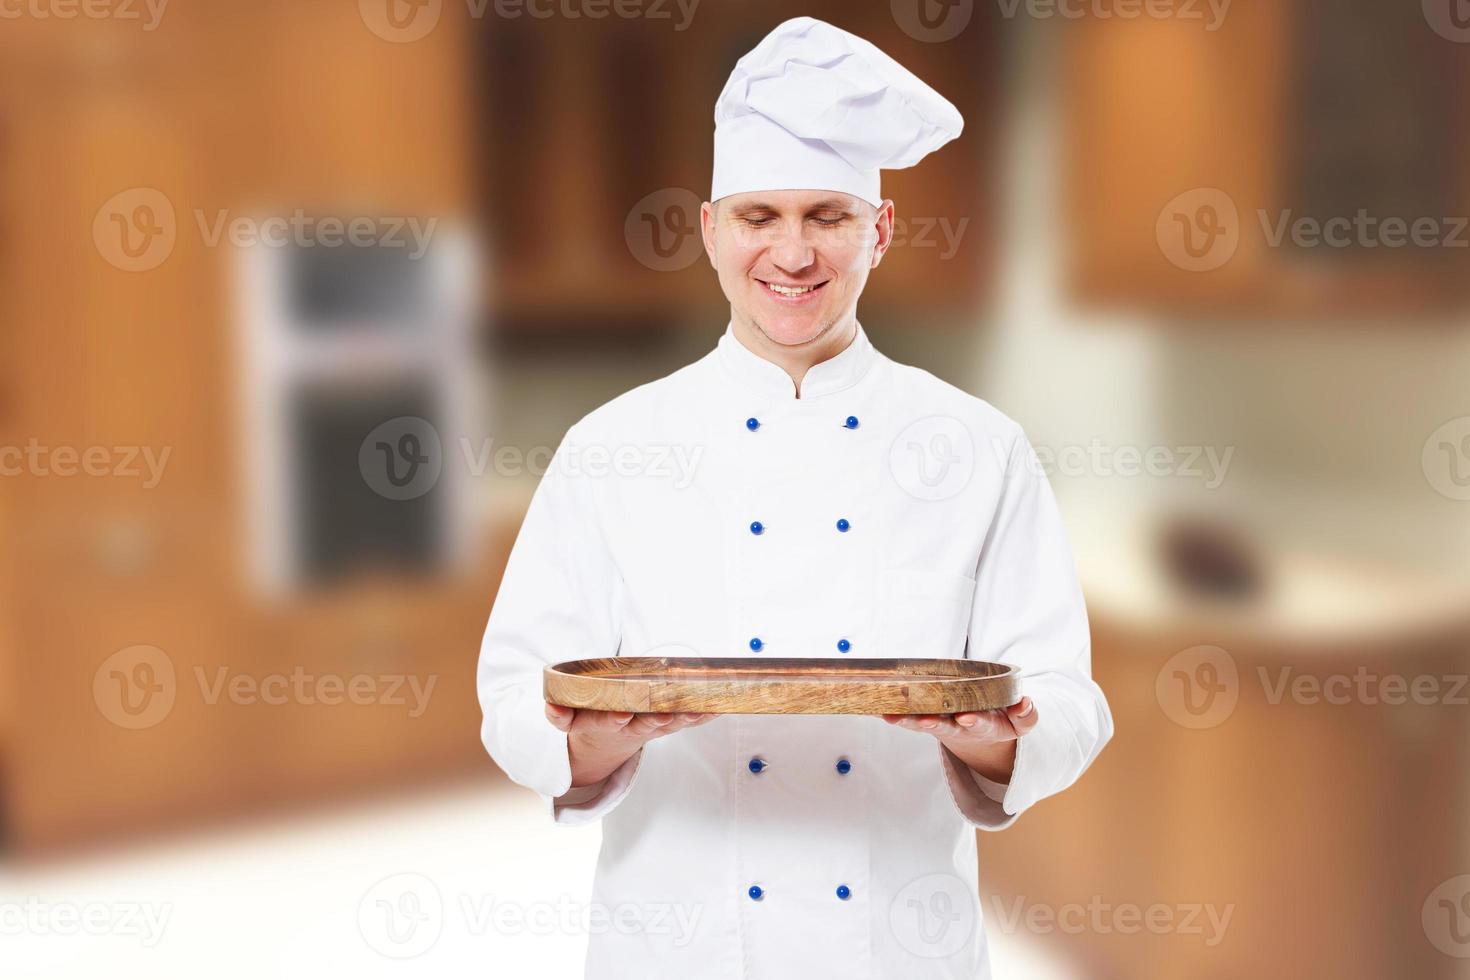 Smile male chef standing in kitchen and hold wooden board mock up with food meal photo